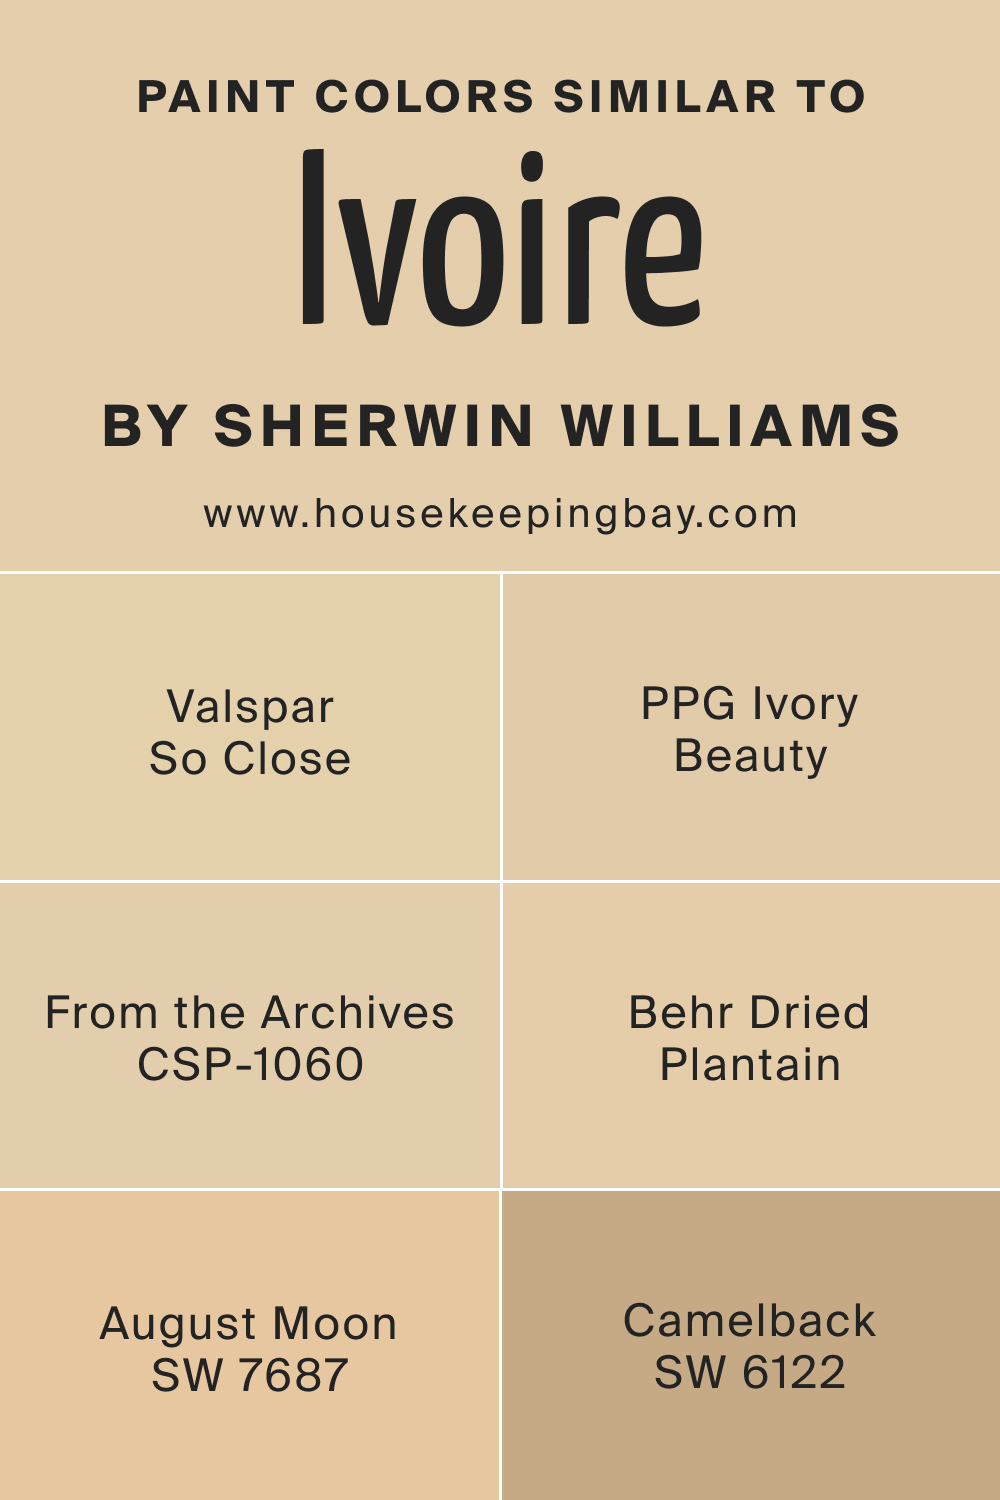 Paint Colors Similar to SW Ivoire by Sherwin Williams